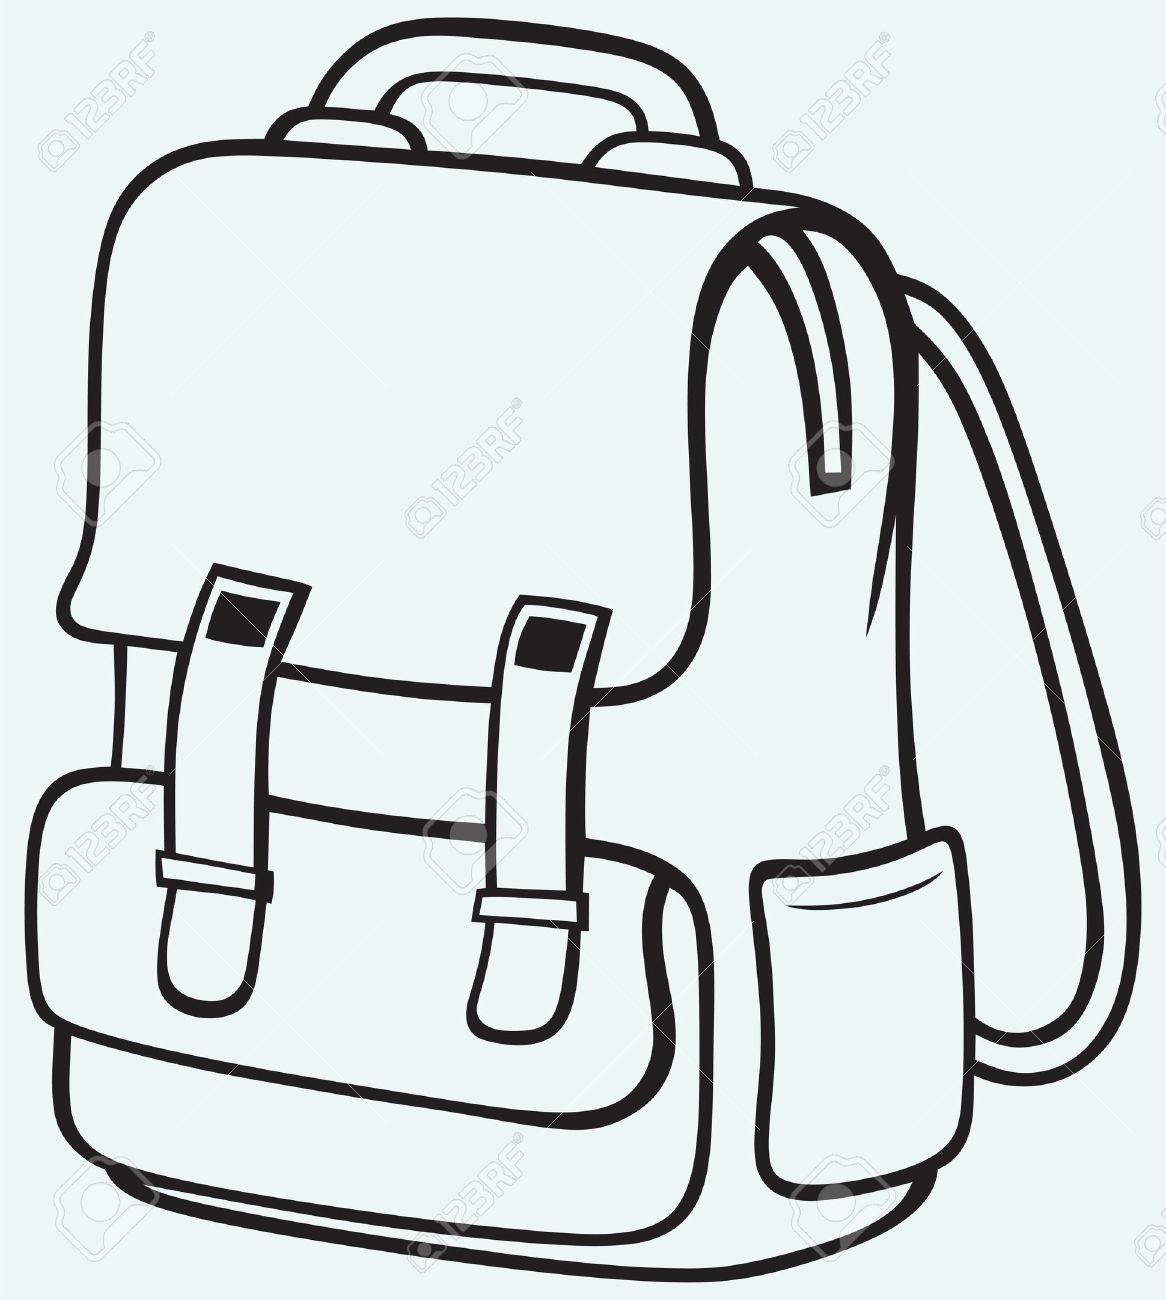 bag clipart black and white school